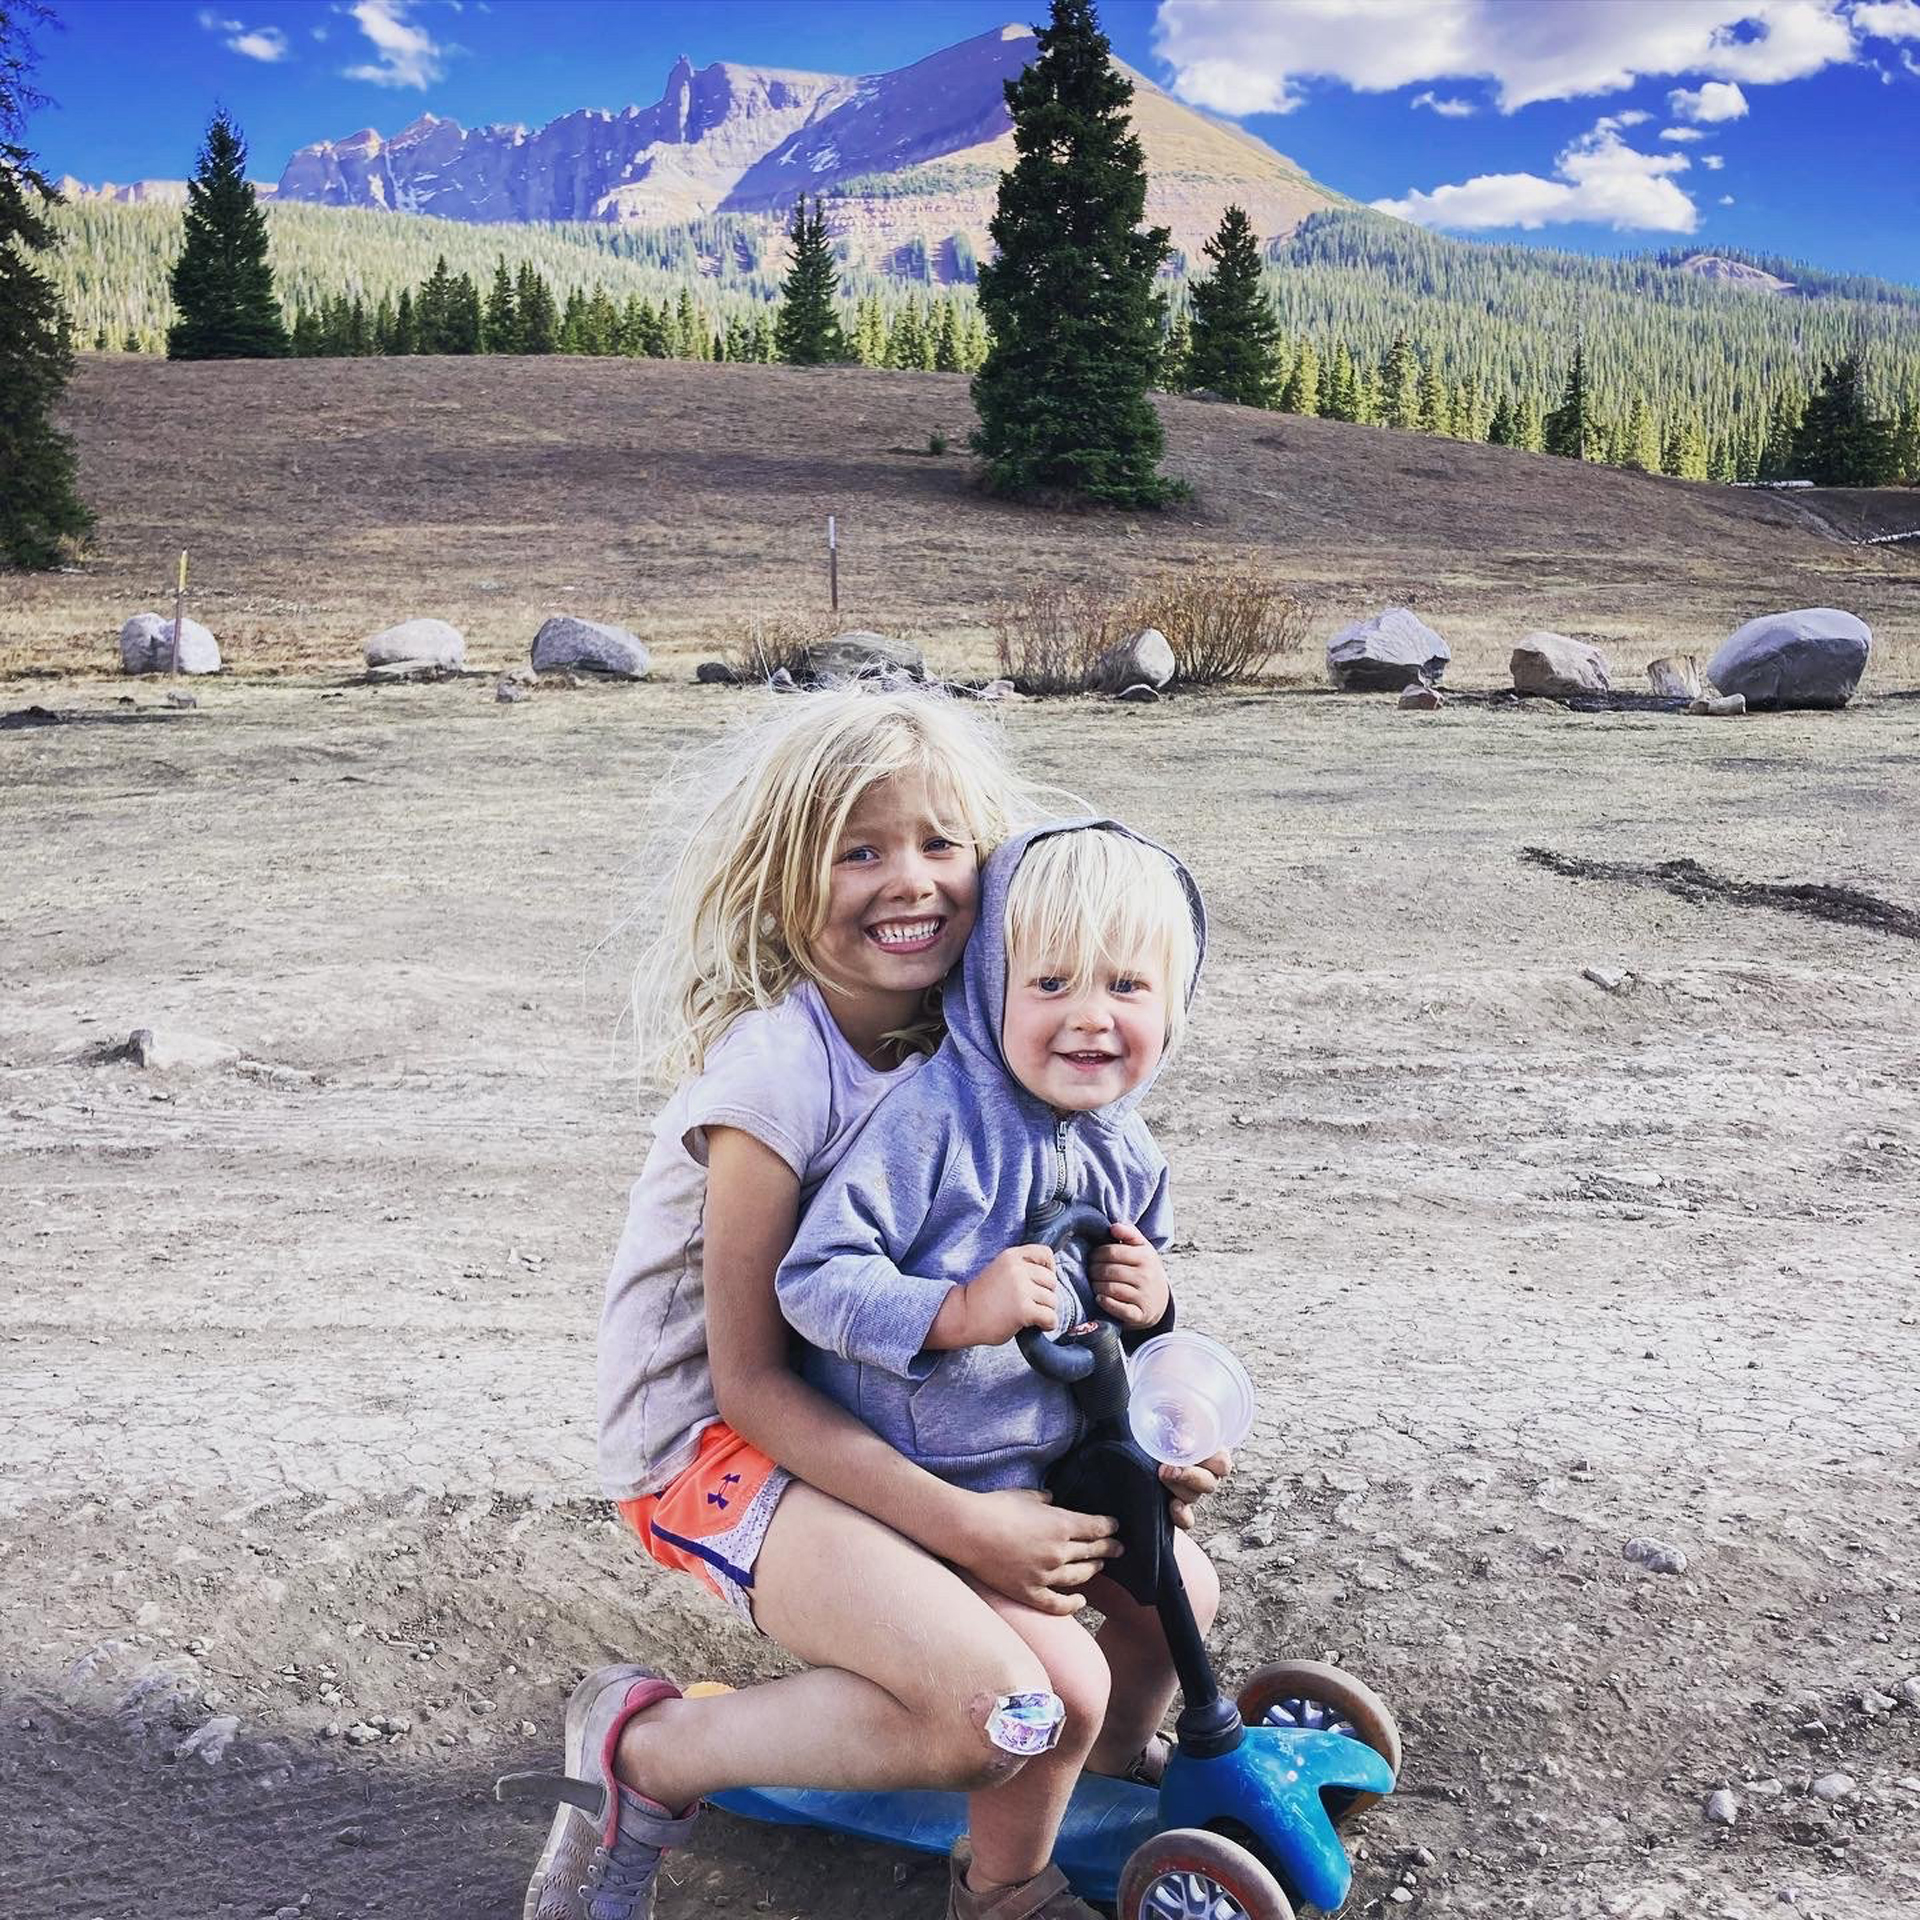 Two kids on a scooter playing in the dirt while they boondock camp in their Airstream travel trailer